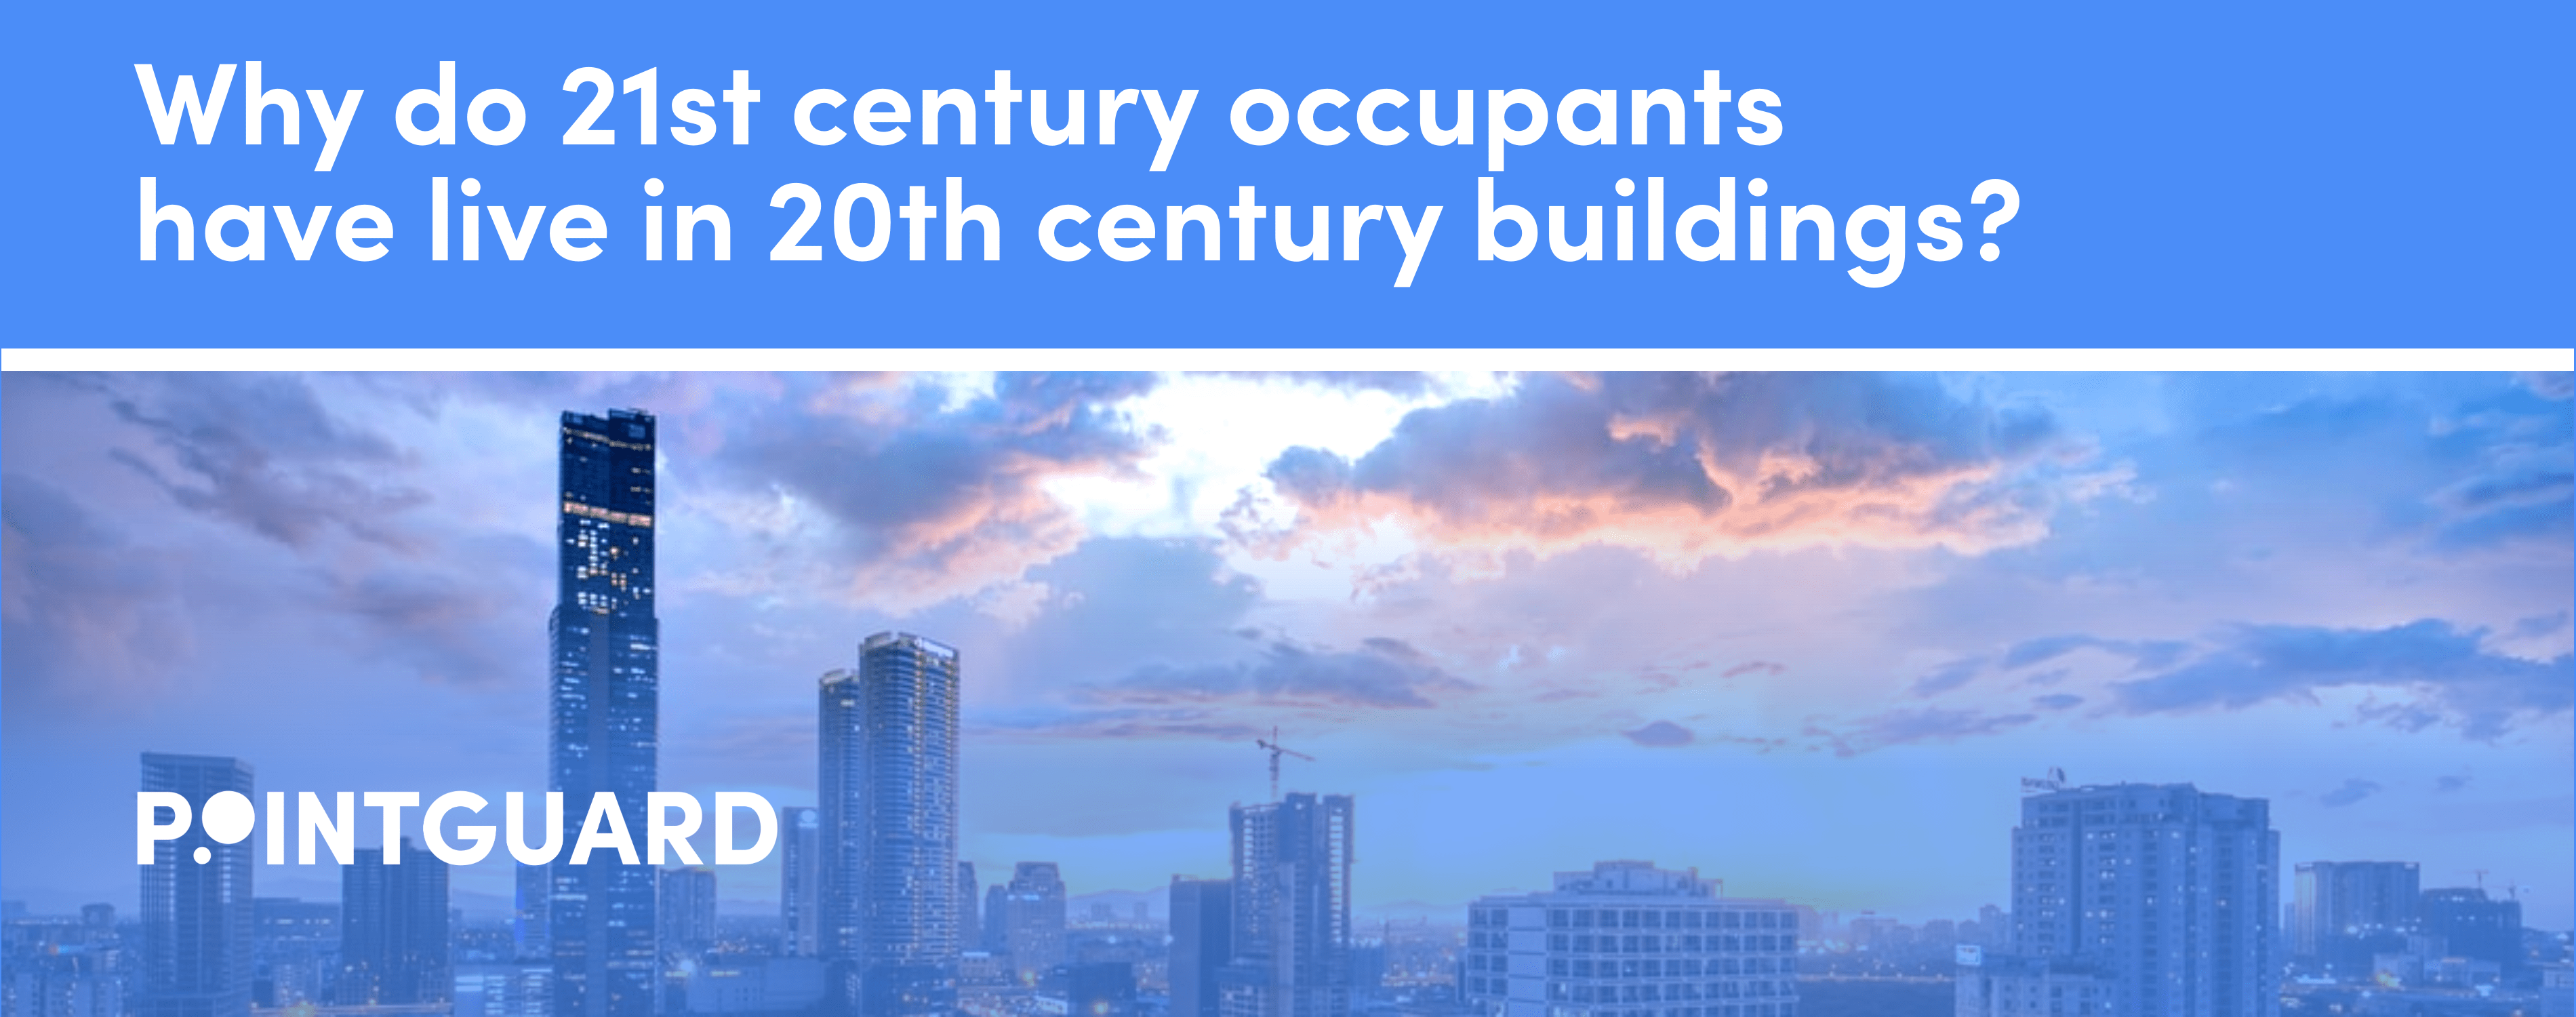 Why do 21st century occupants live in 20th century buildings?